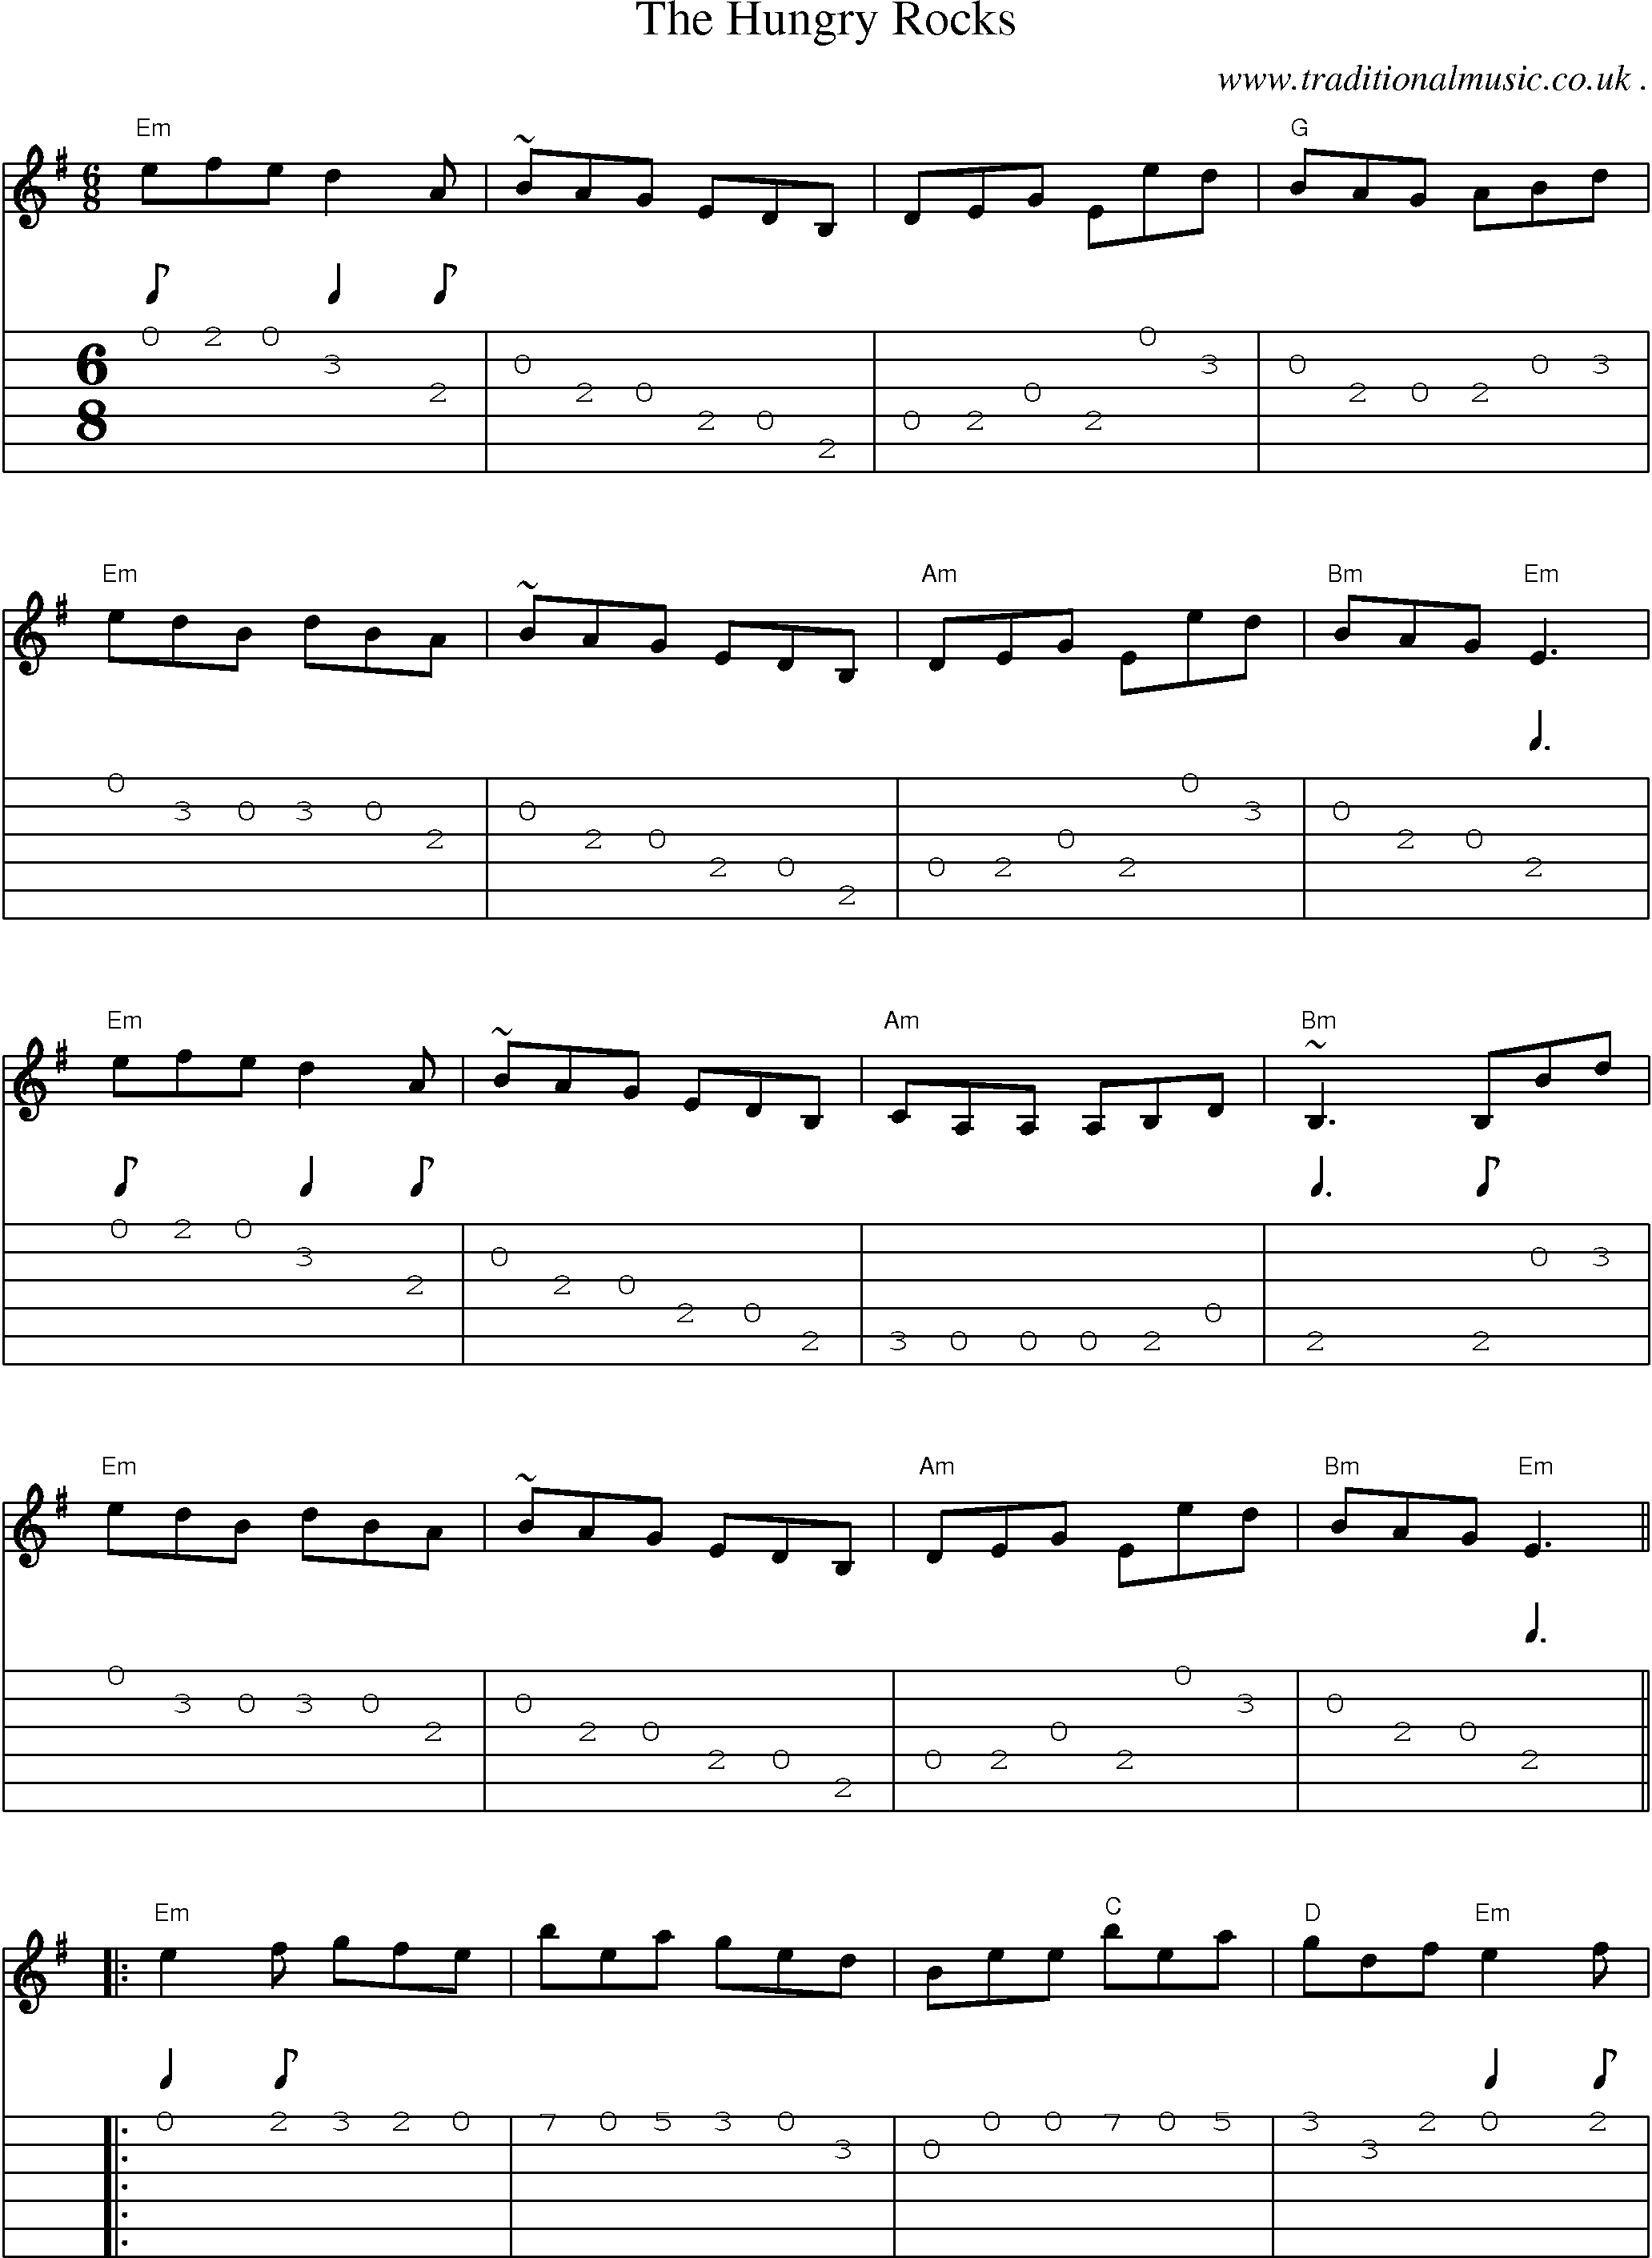 Music Score and Guitar Tabs for The Hungry Rocks